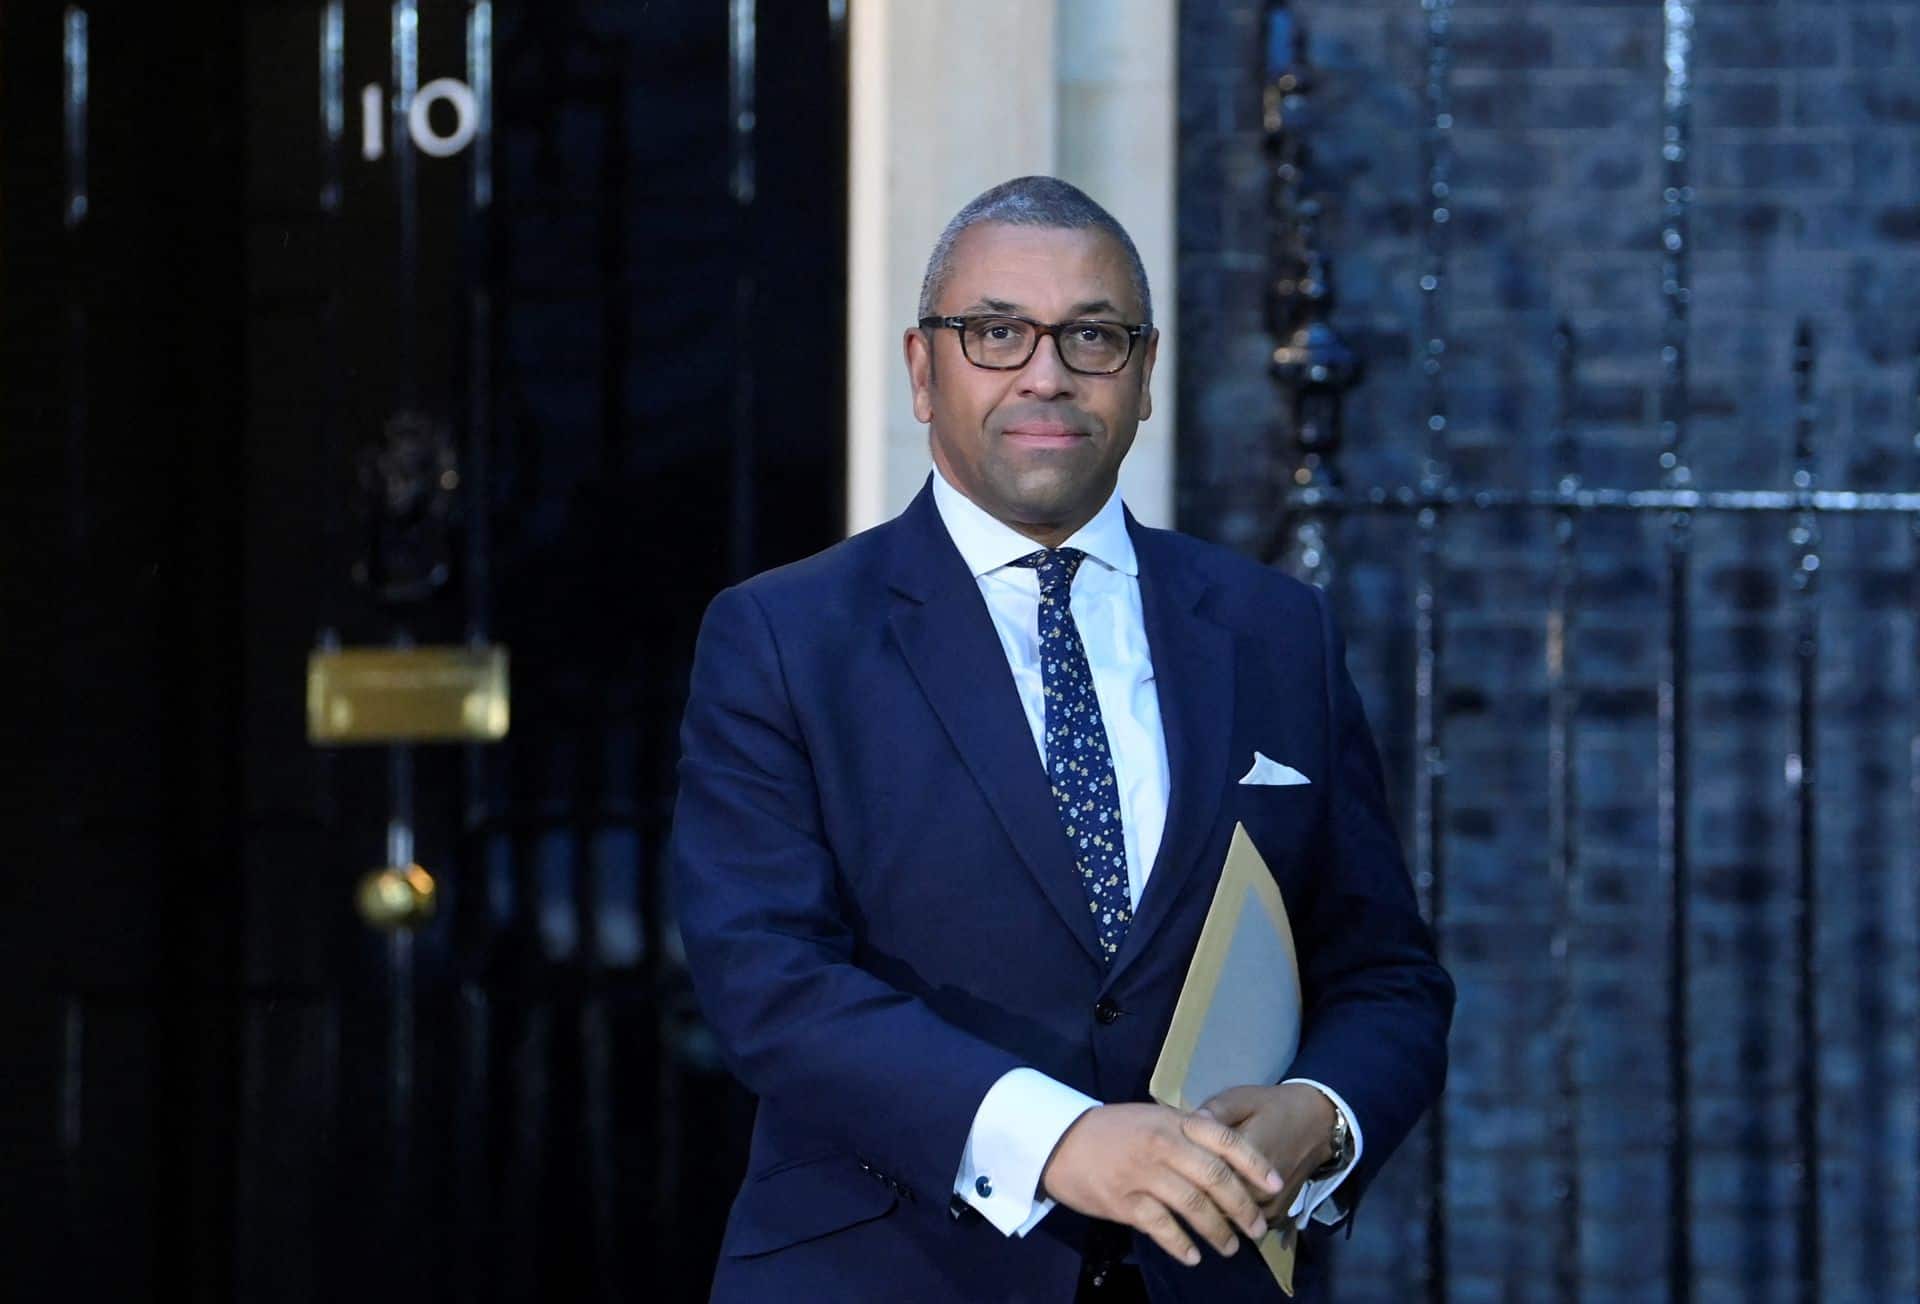 James Cleverly has become Britain's first Black foreign minister